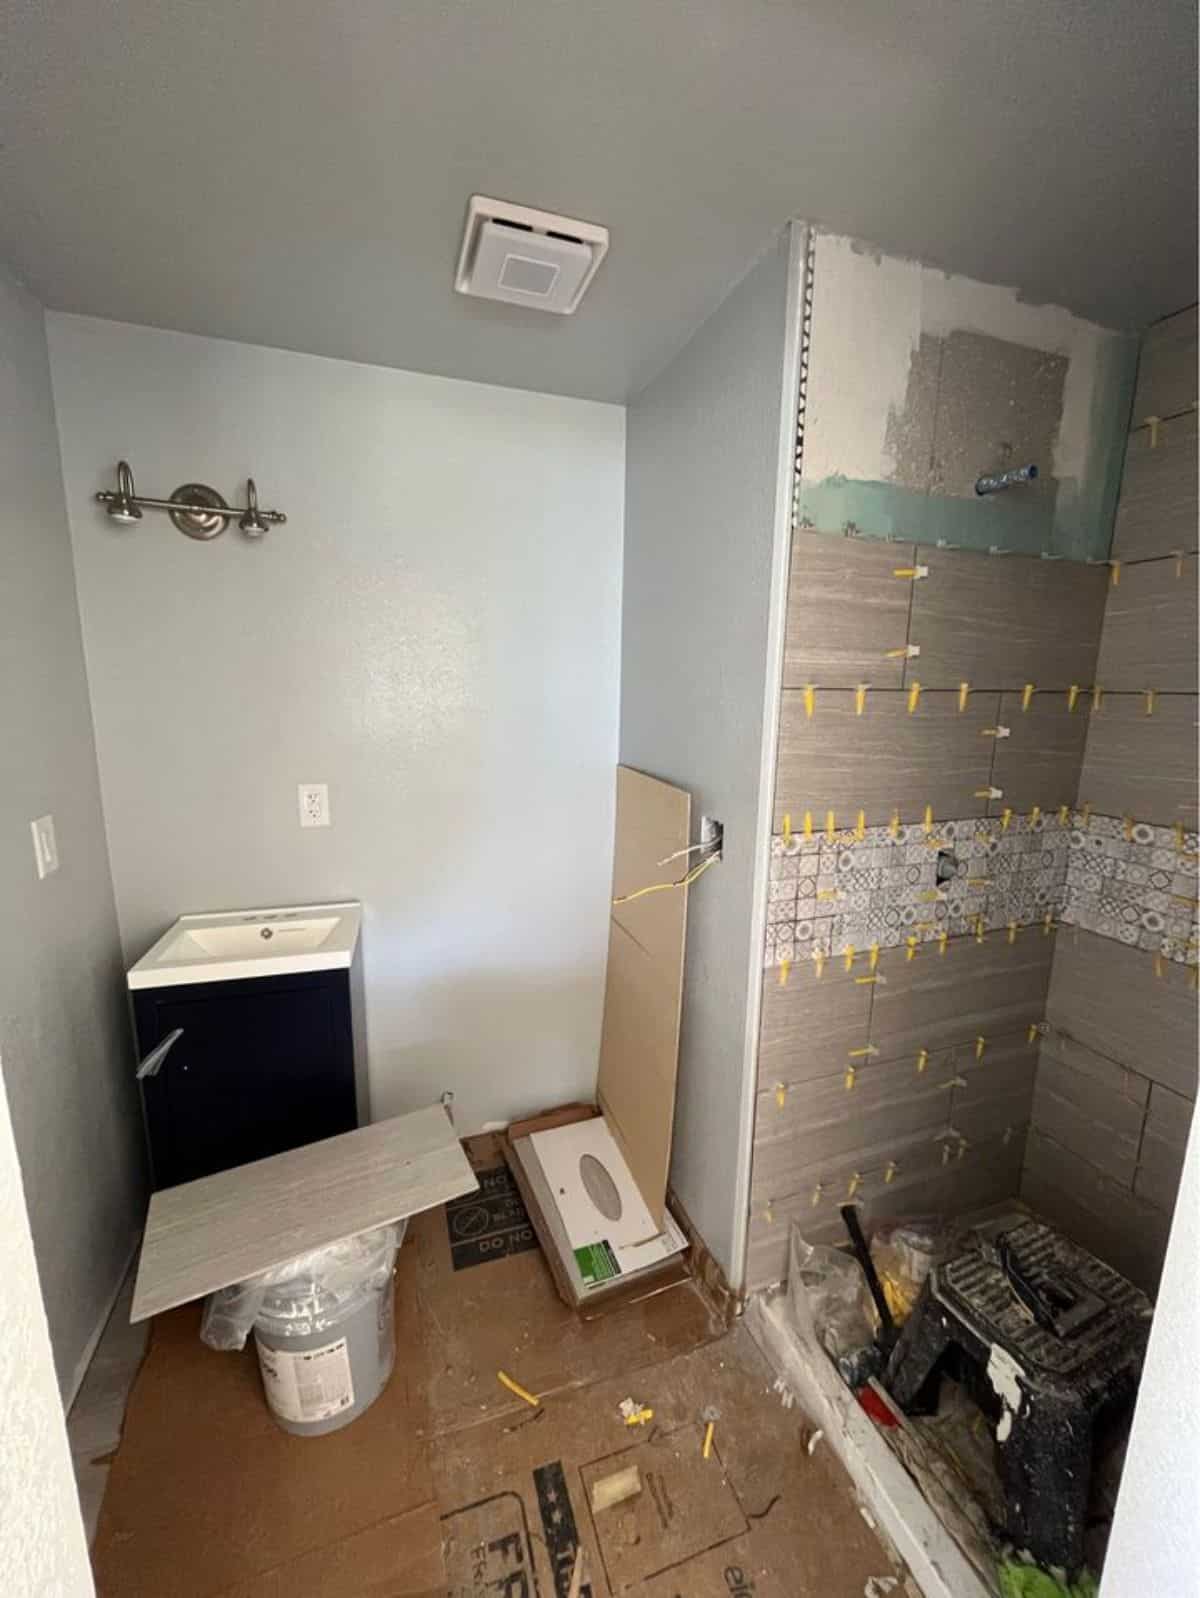 bathroom of 32' one bed tiny home has all the standard fitting